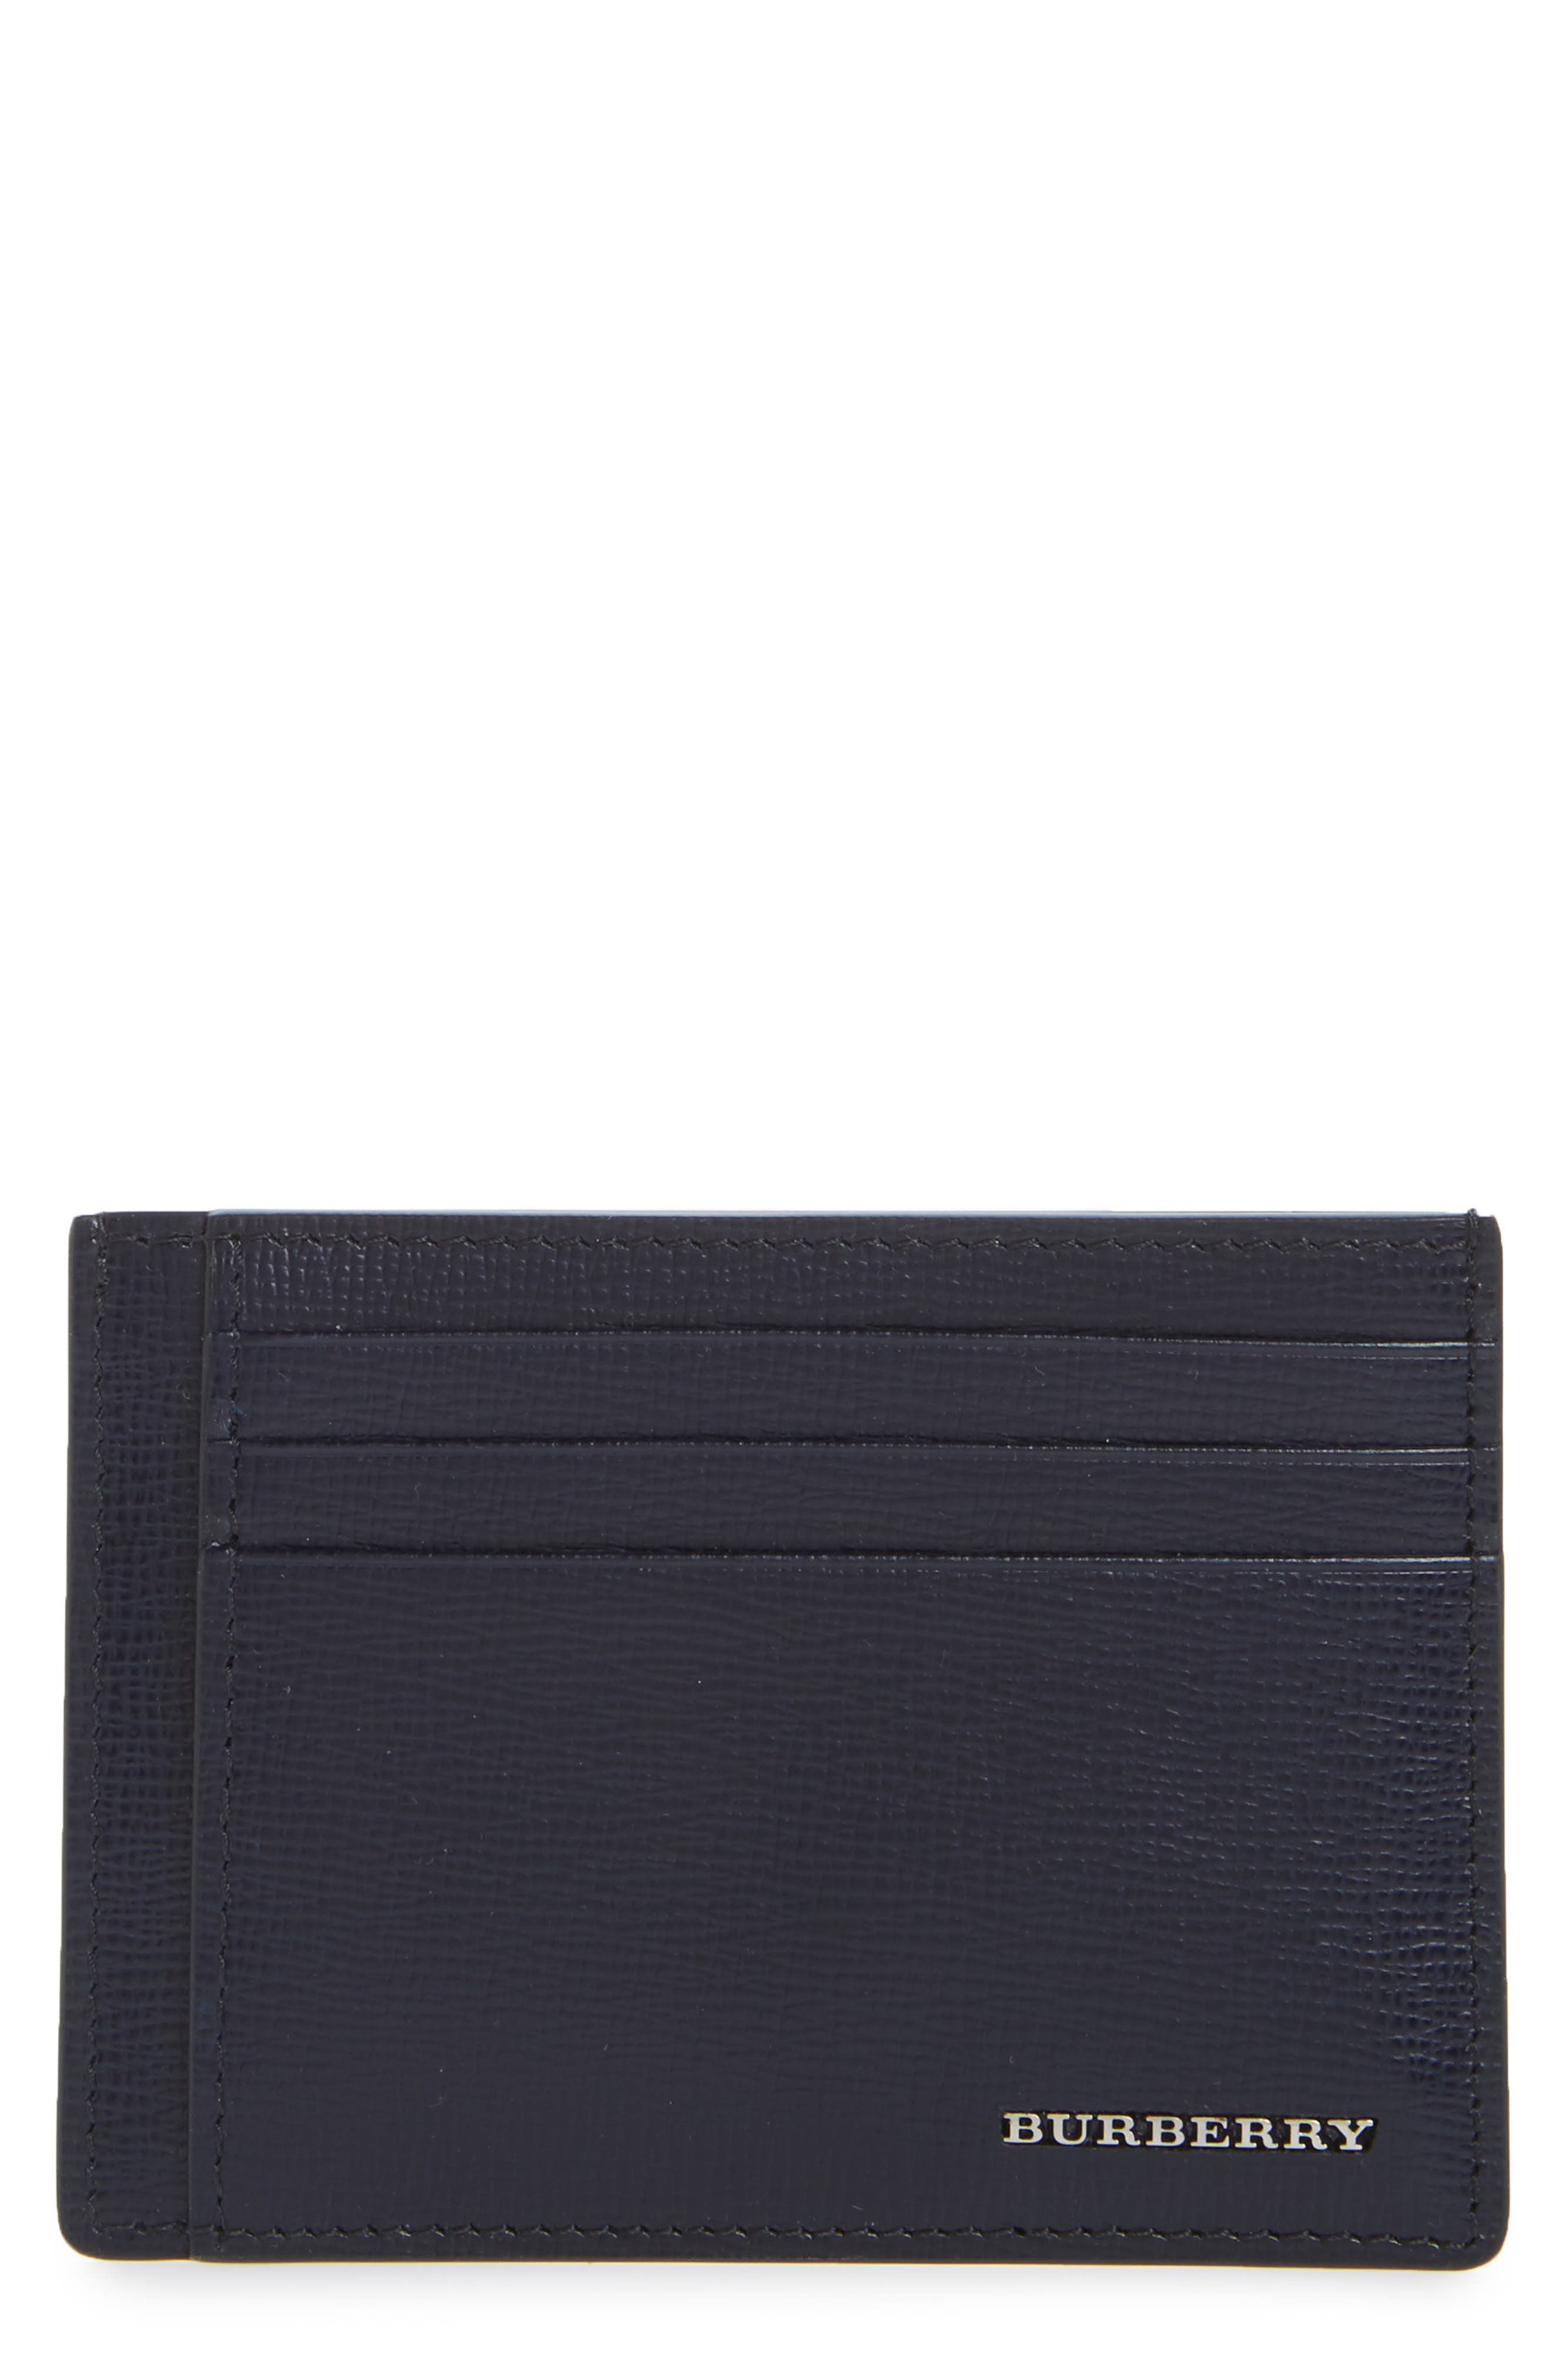 Burberry 'Chase' Money Clip Card Case 